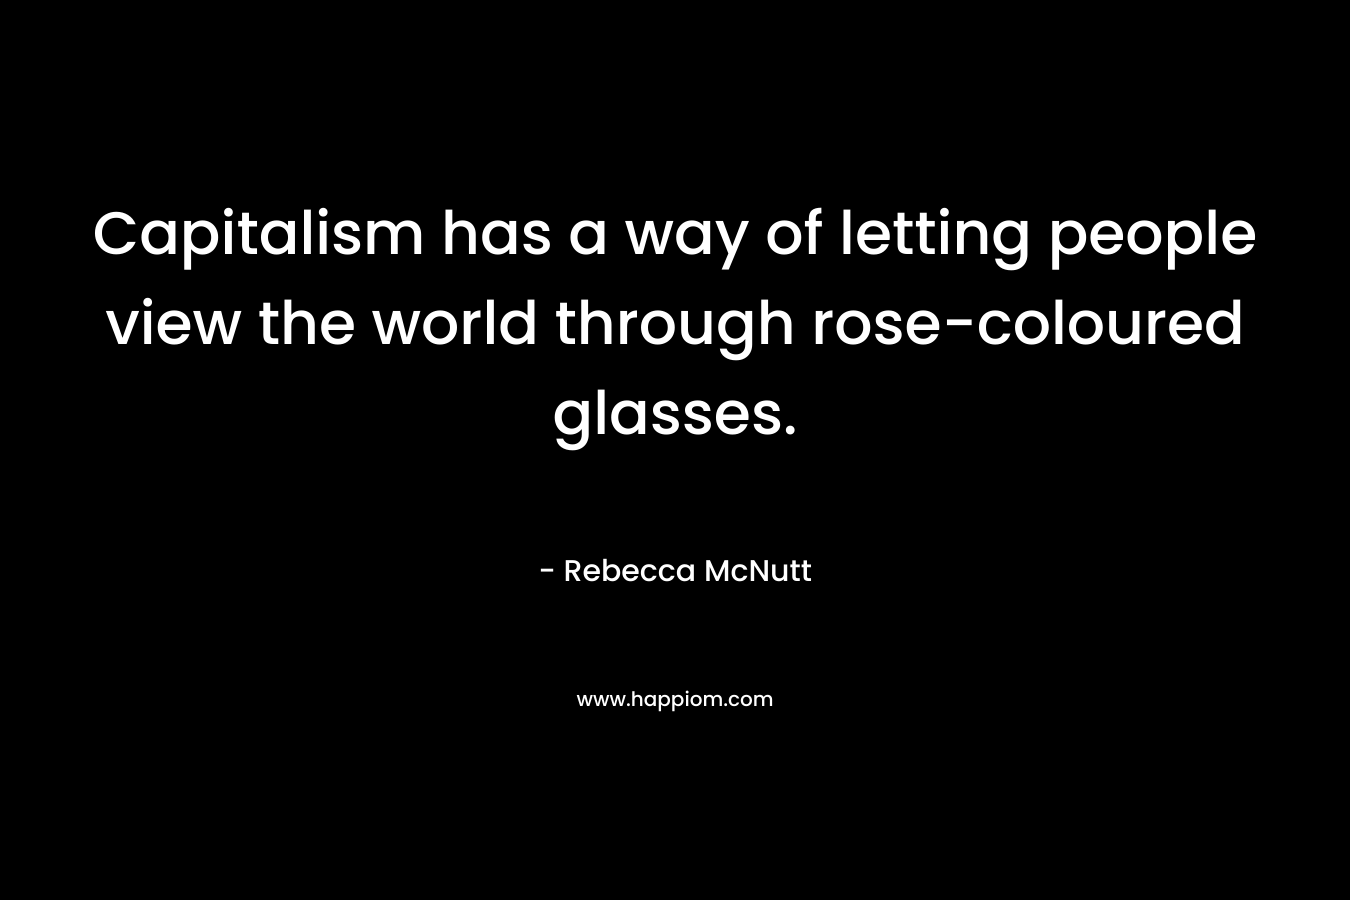 Capitalism has a way of letting people view the world through rose-coloured glasses. – Rebecca McNutt